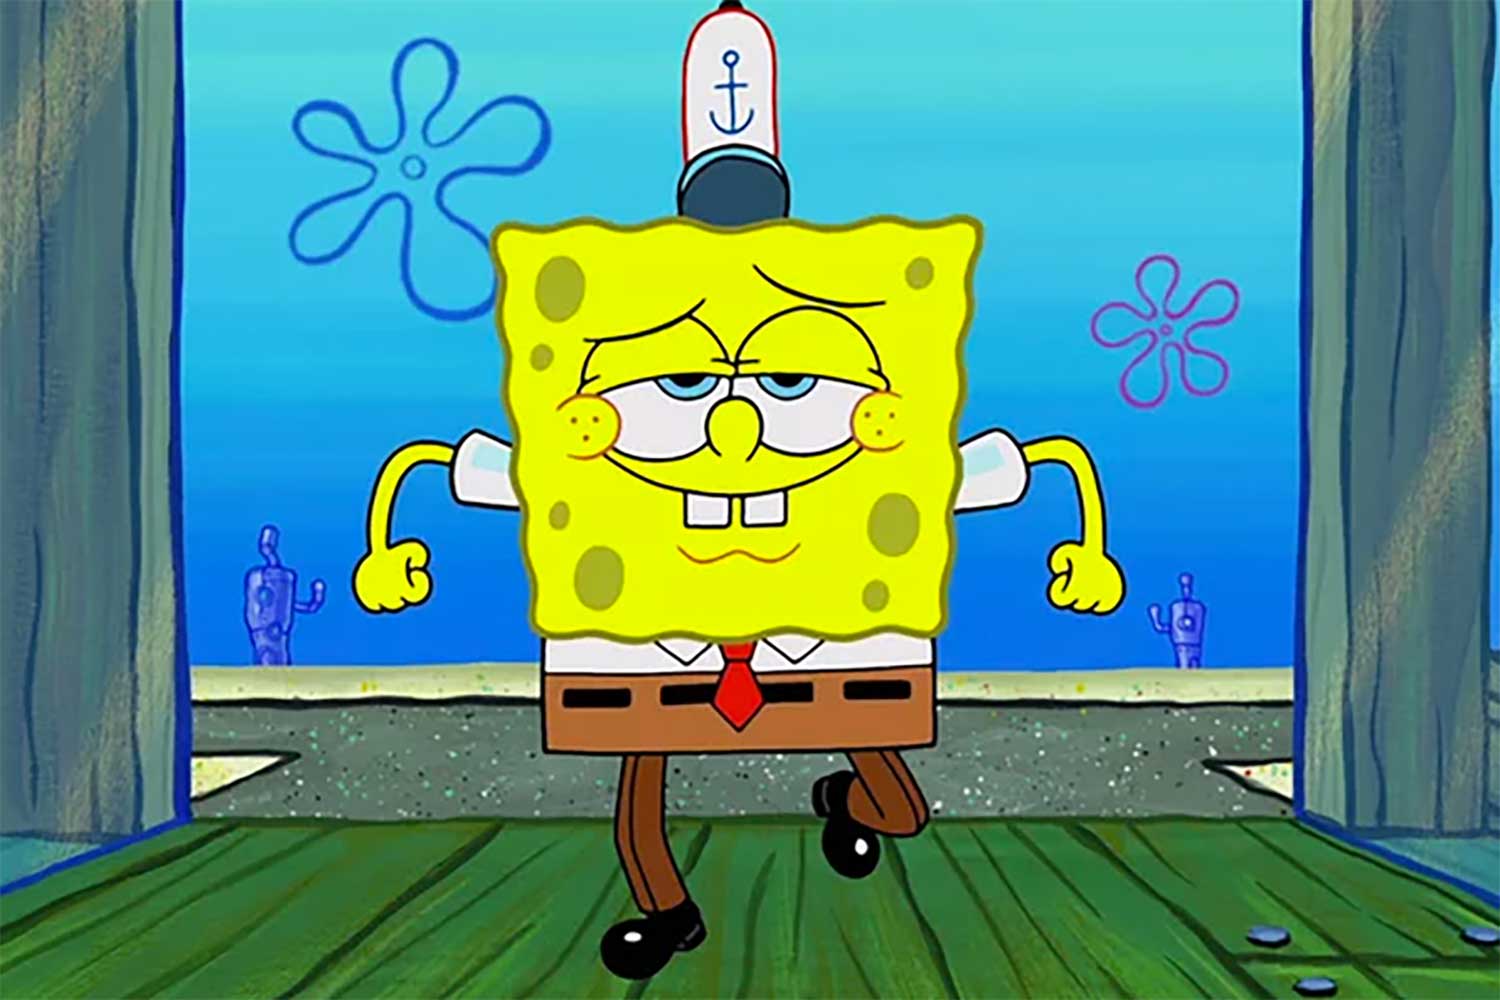 People are divided over what type of sponge Spongebob Squarepants is.